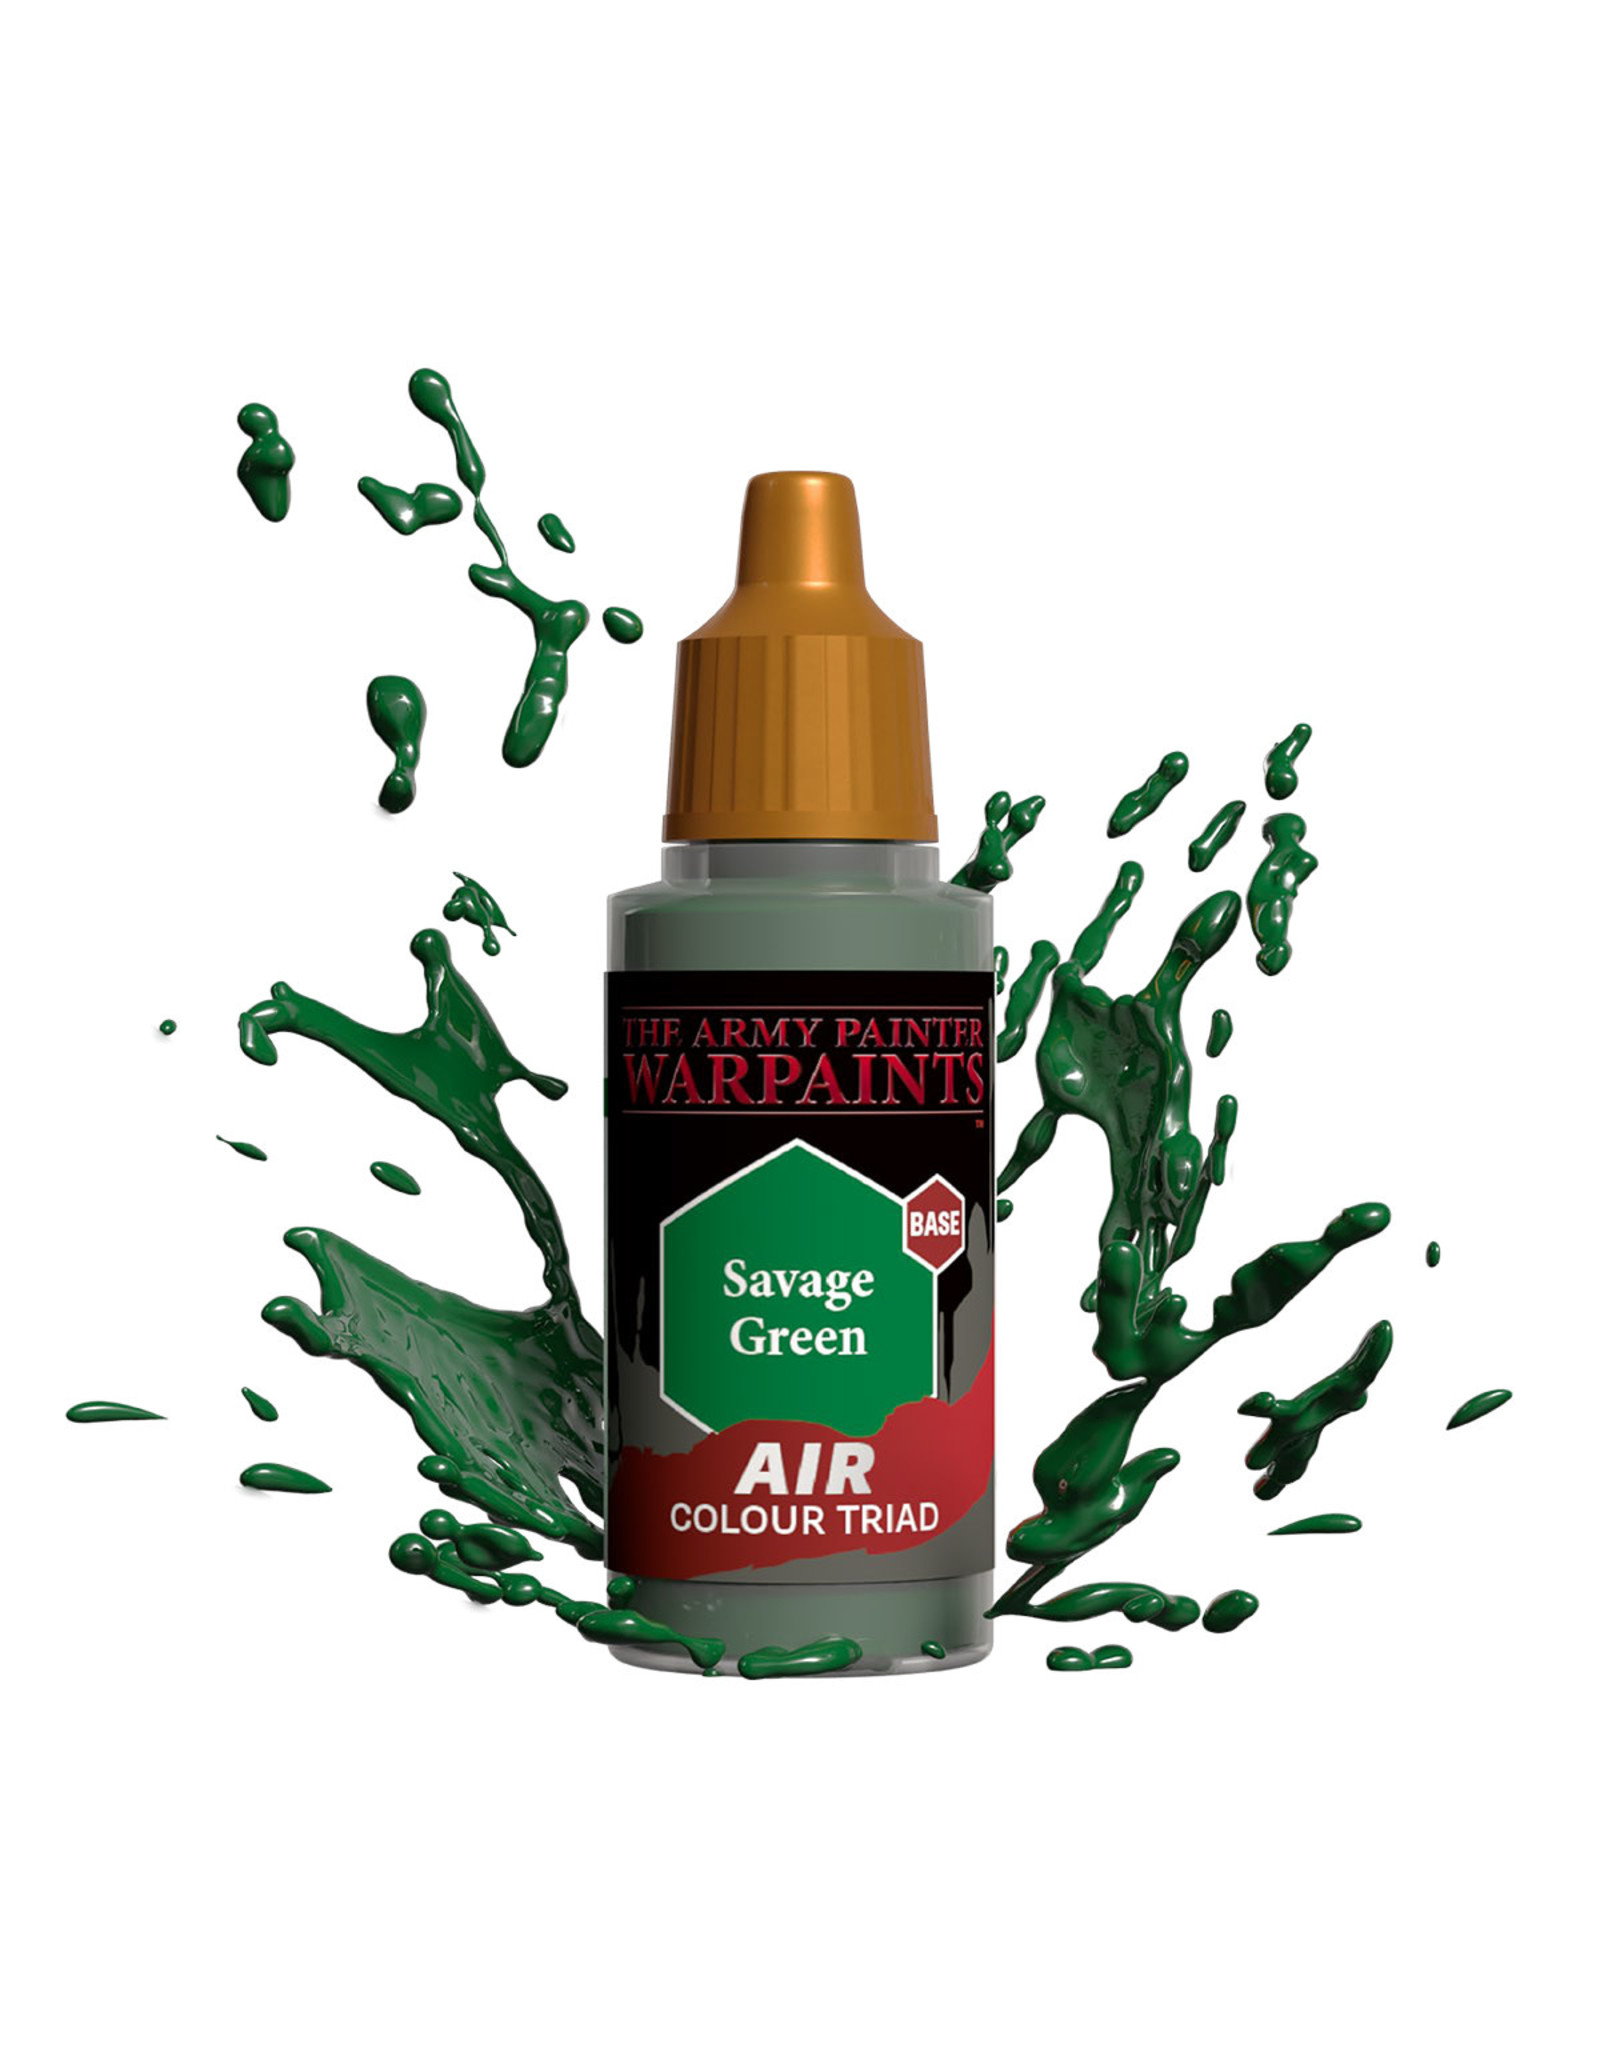 The Army Painter The Army Painter Warpaints Air: Savage Green